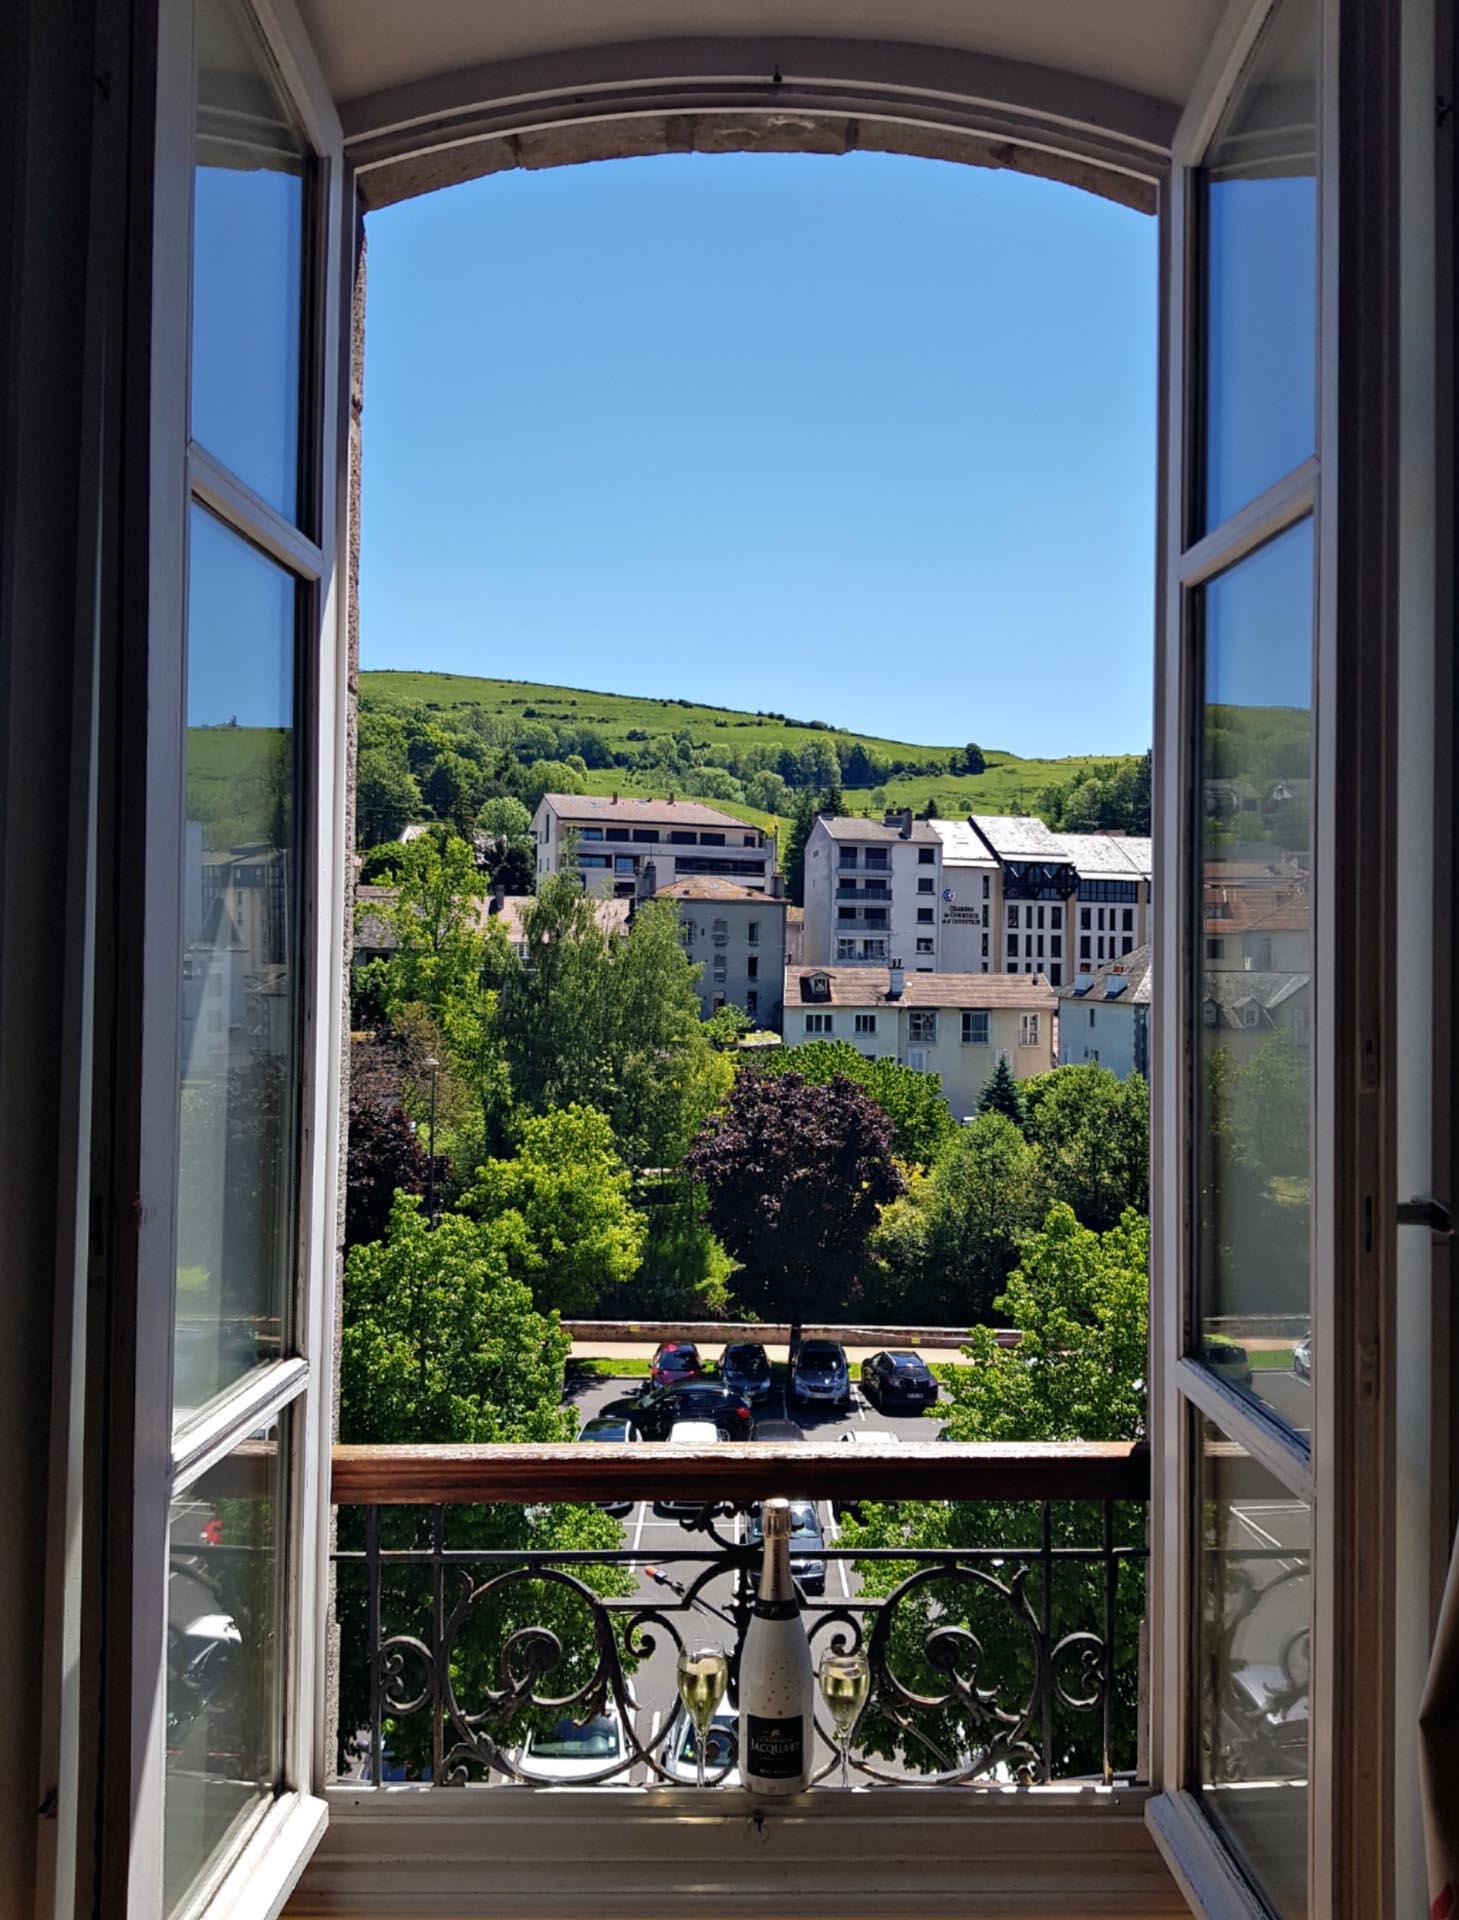 View from the room at the Grand Hôtel Saint-Pierre